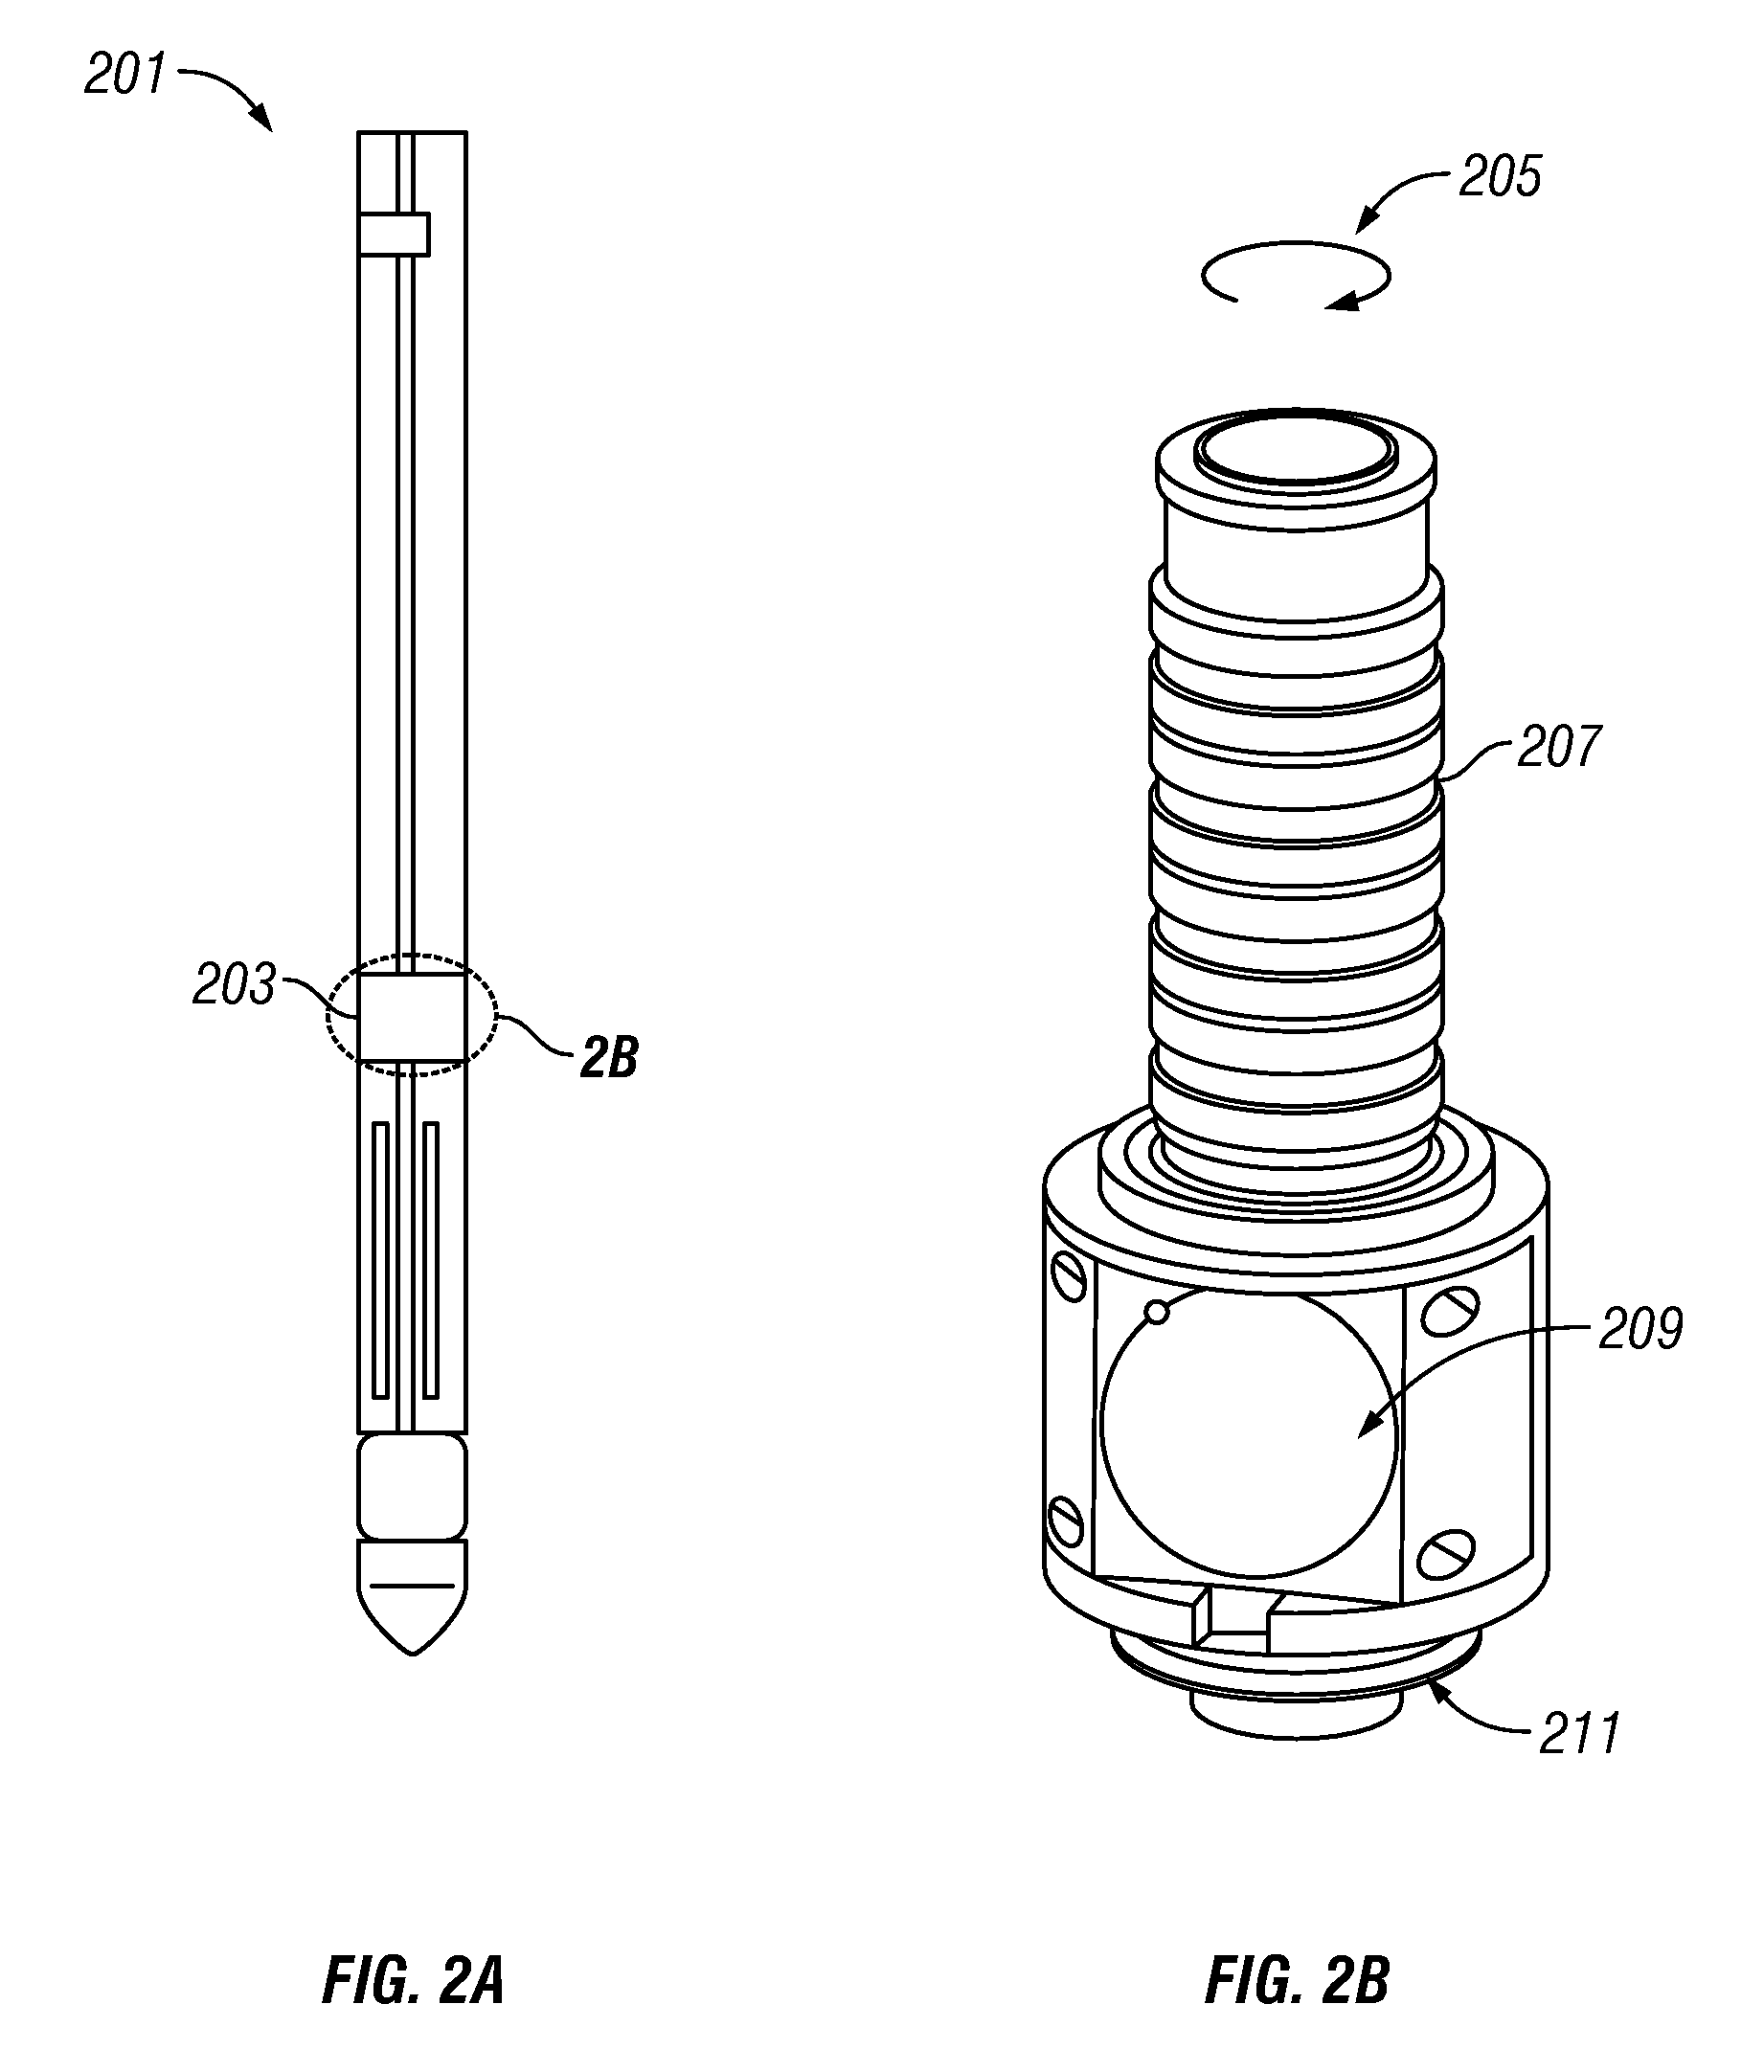 Composite Transducer for Downhole Ultrasonic Imaging and Caliper Measurement